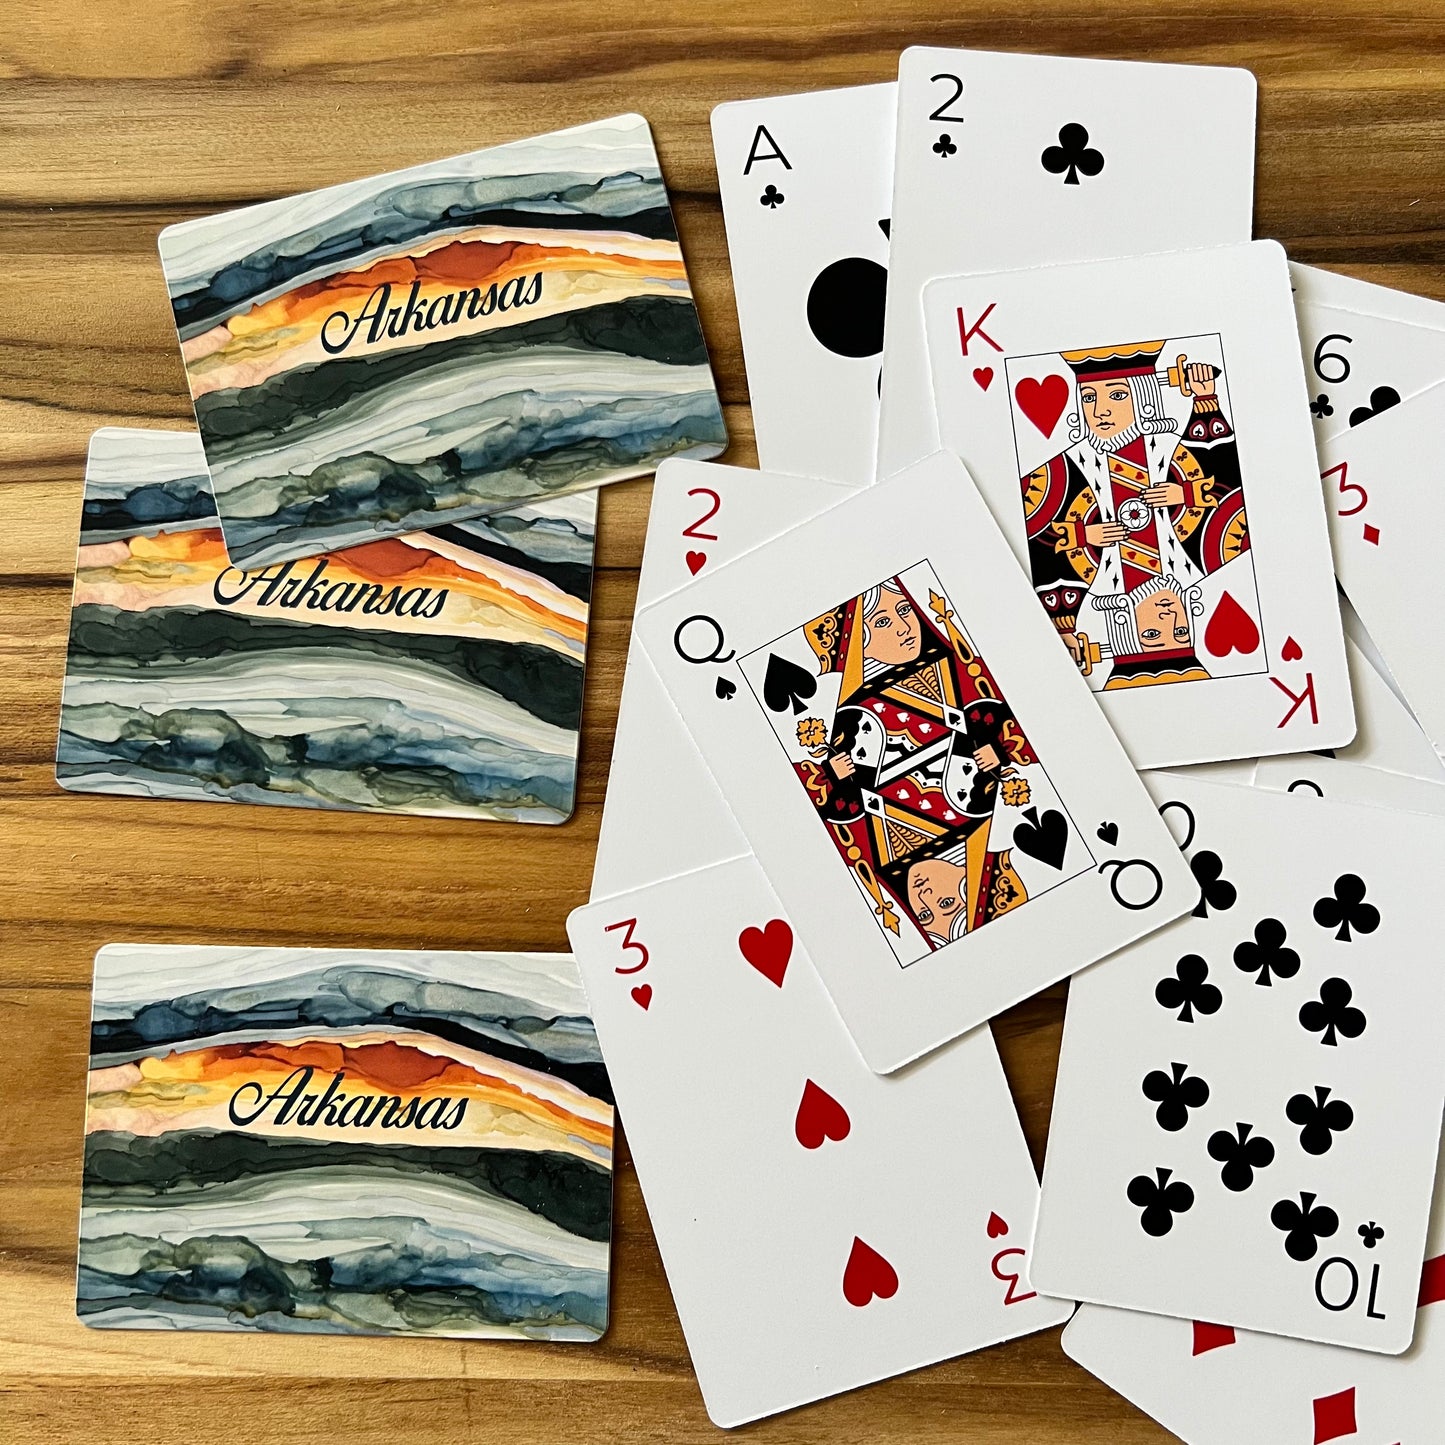 playing cards arranged on a wooden table, some are face up, others are face down showing sunrise image and "arkansas" printed on them.